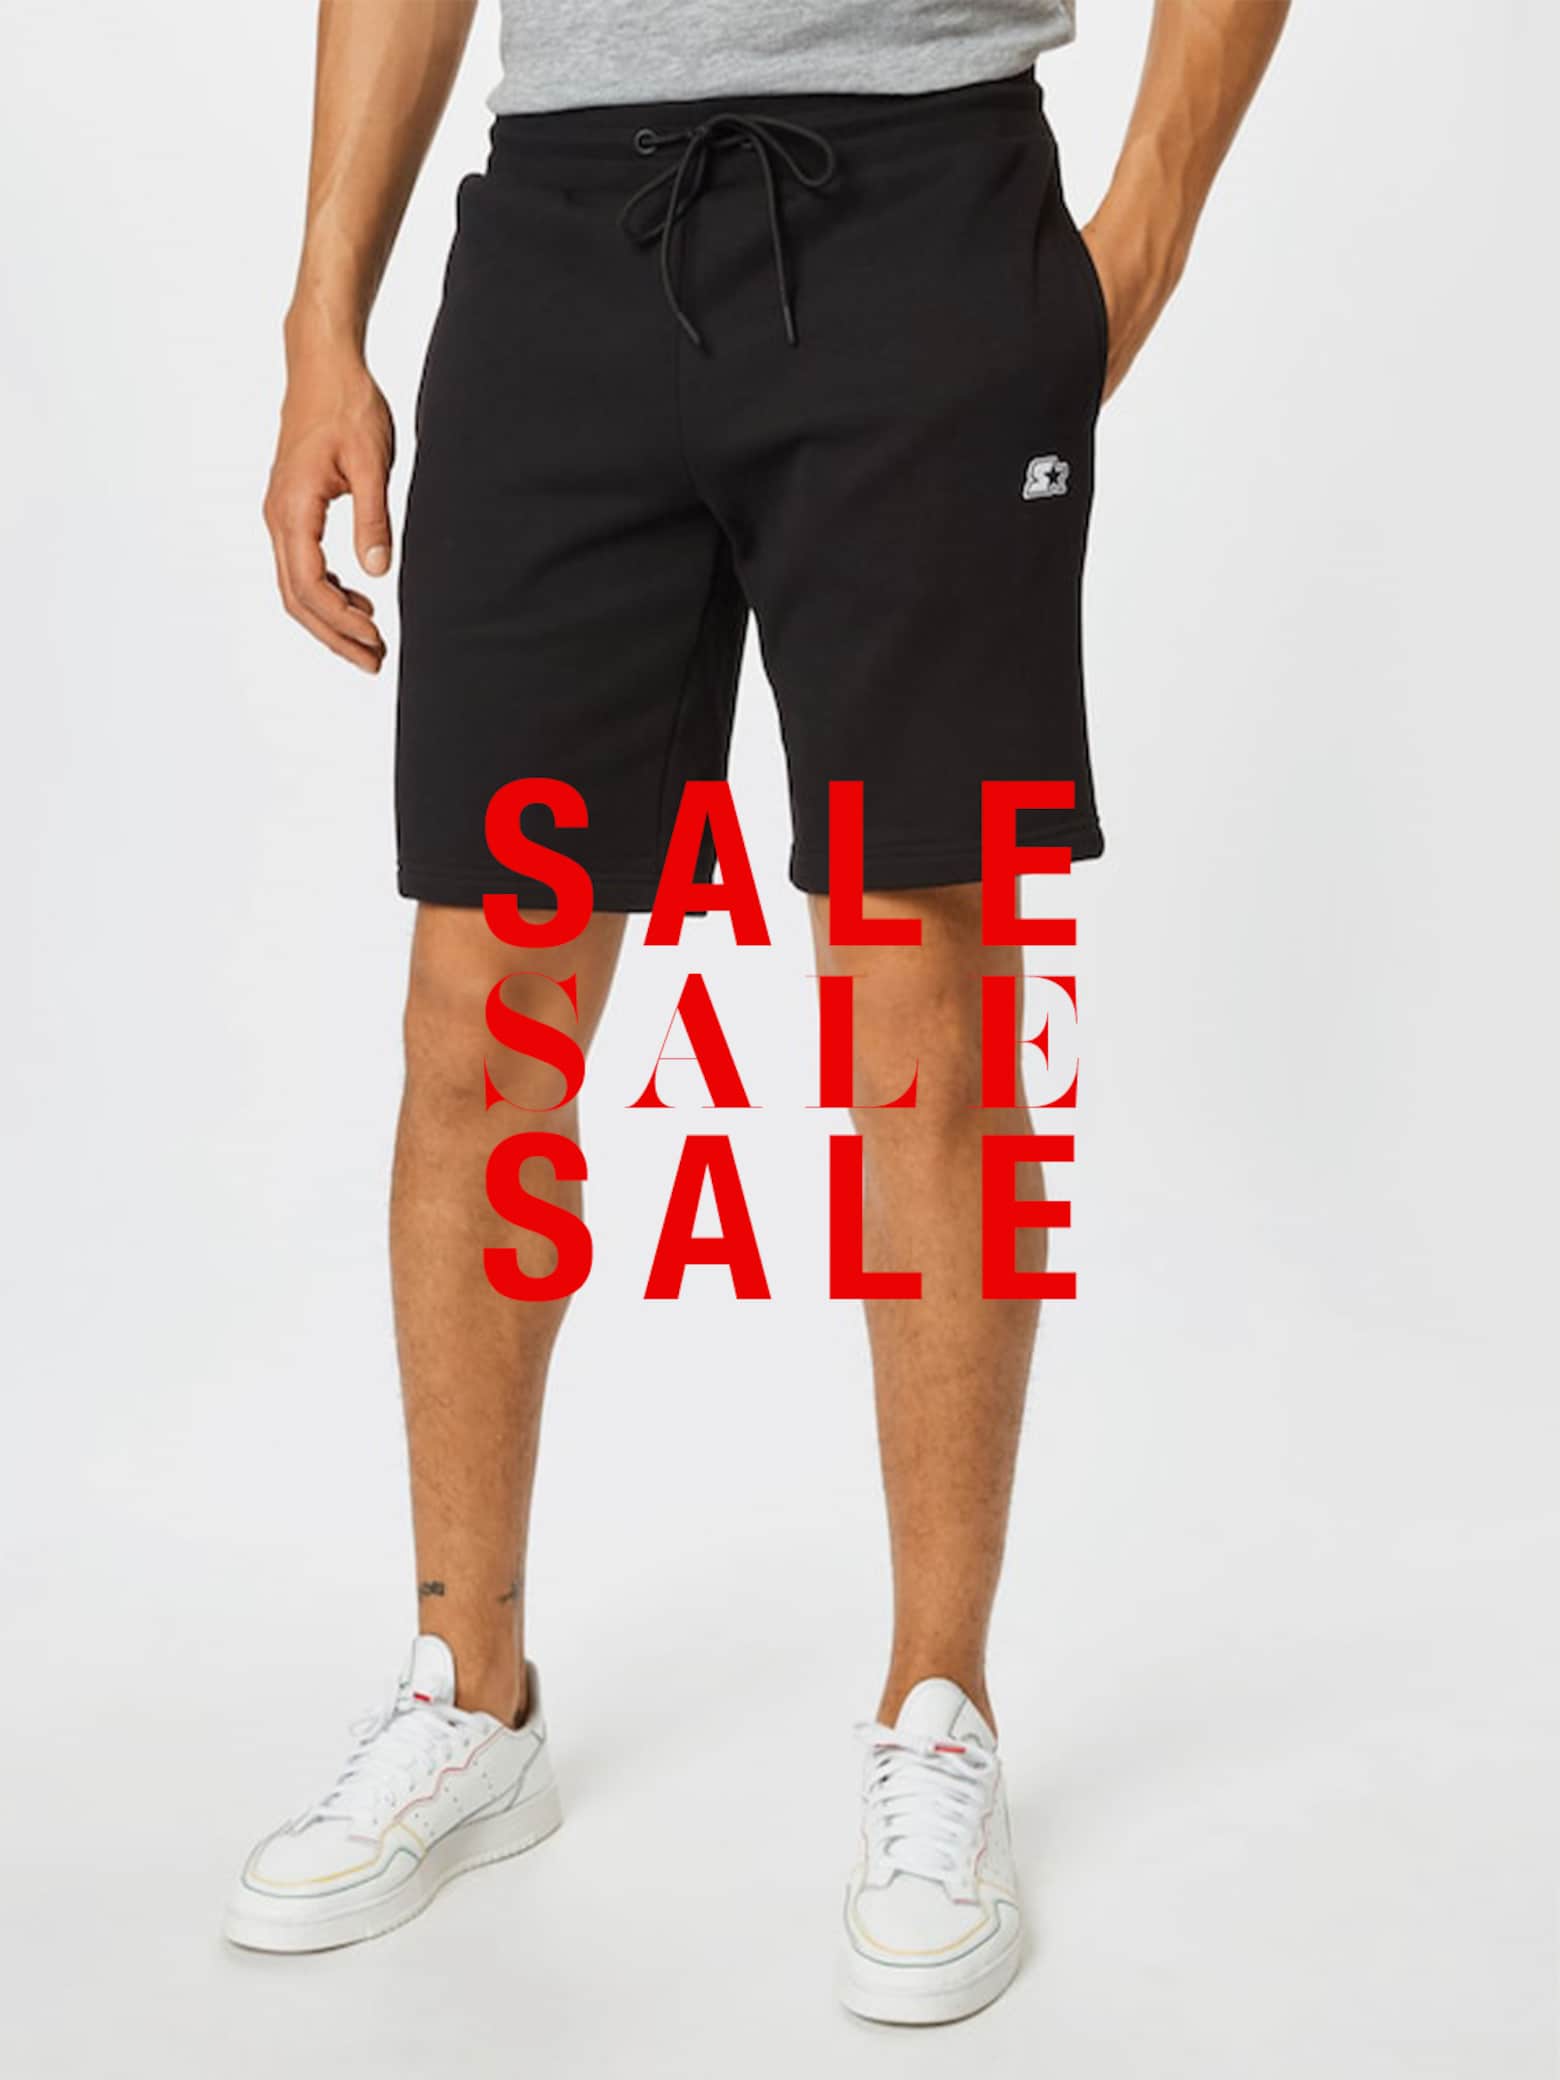 Save now! Shorts